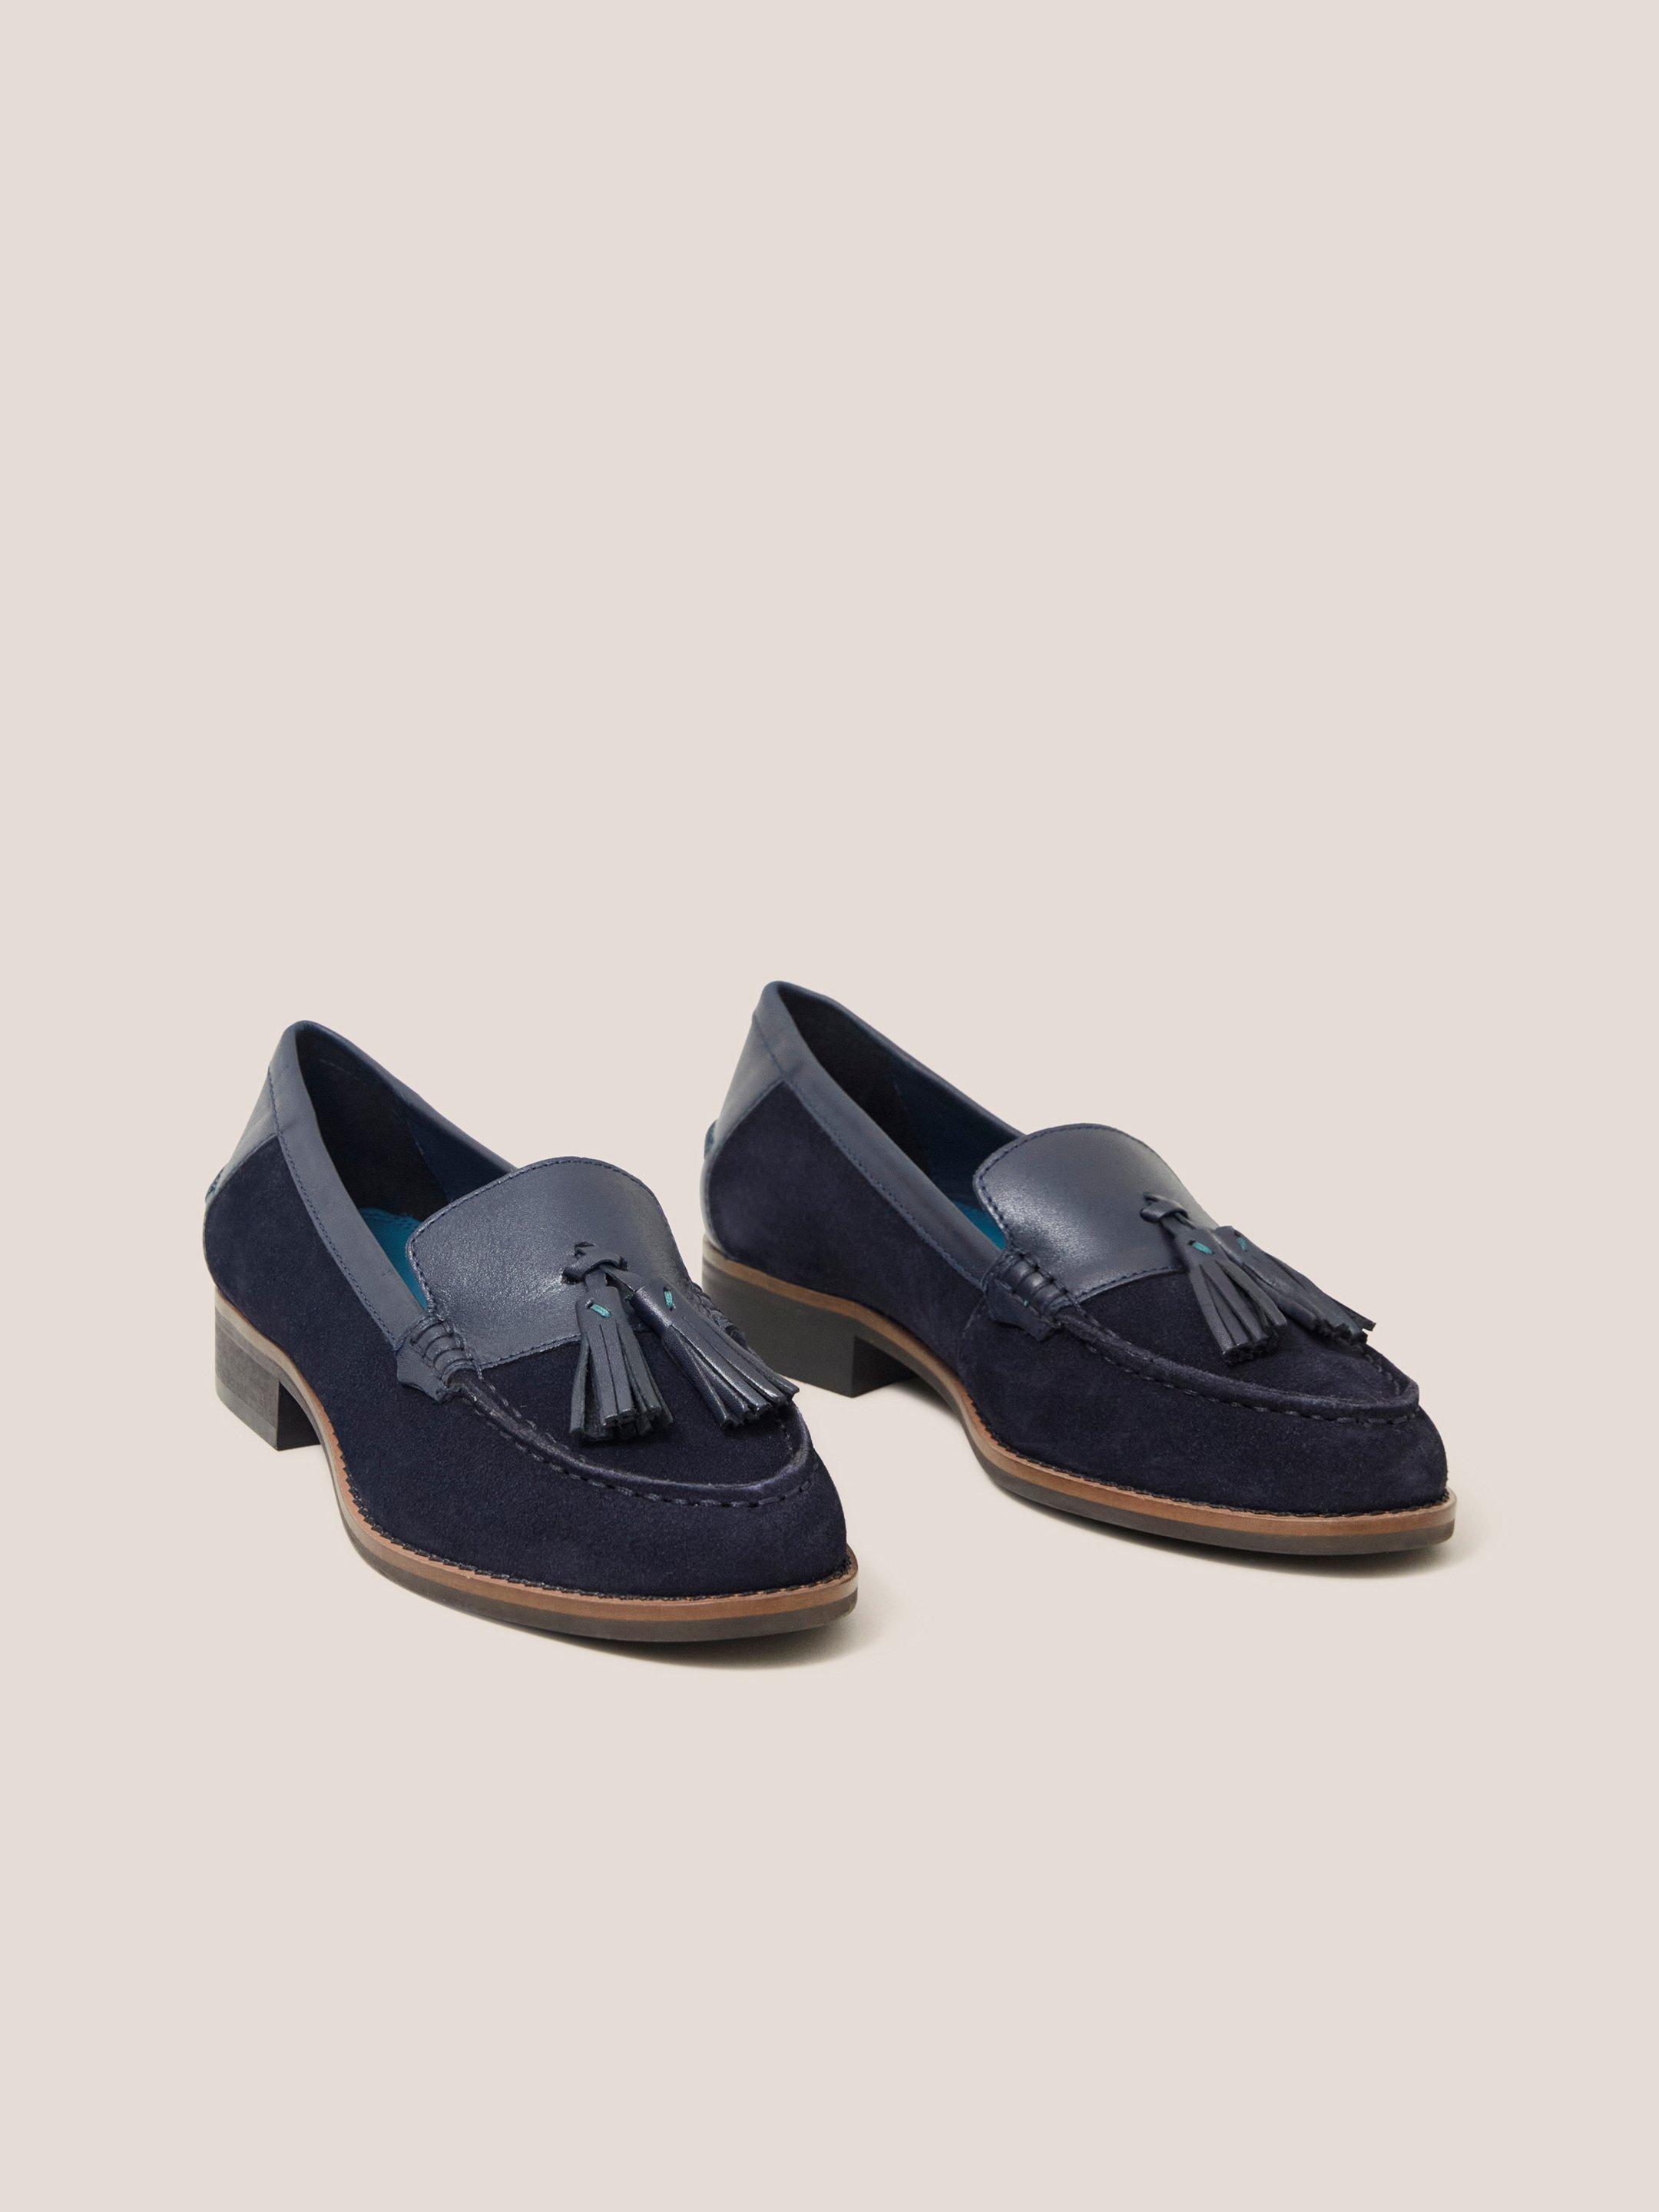 Elba Leather Loafer in DARK NAVY - FLAT FRONT